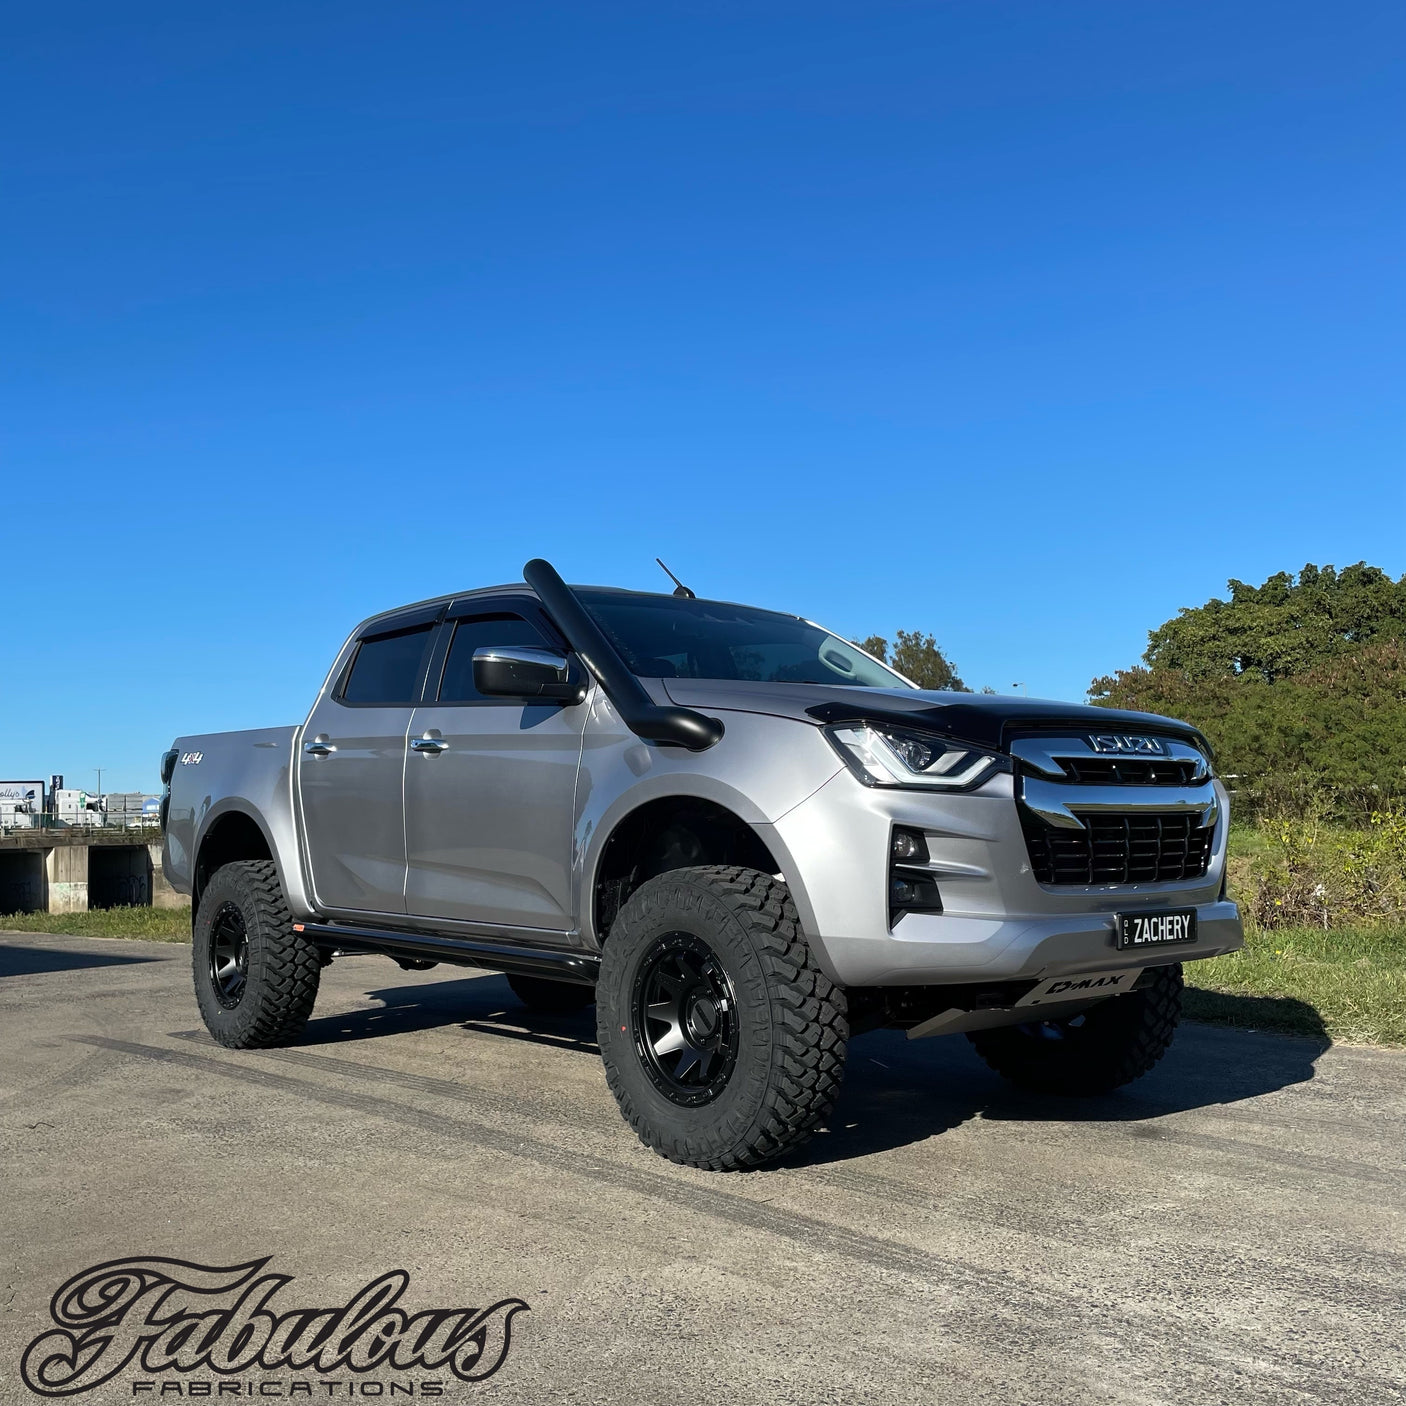 Isuzu Dmax 2020 Onwards Stainless Snorkel and Alloy Panel Filter Airbox Kit (Short & Mid Entry Available)